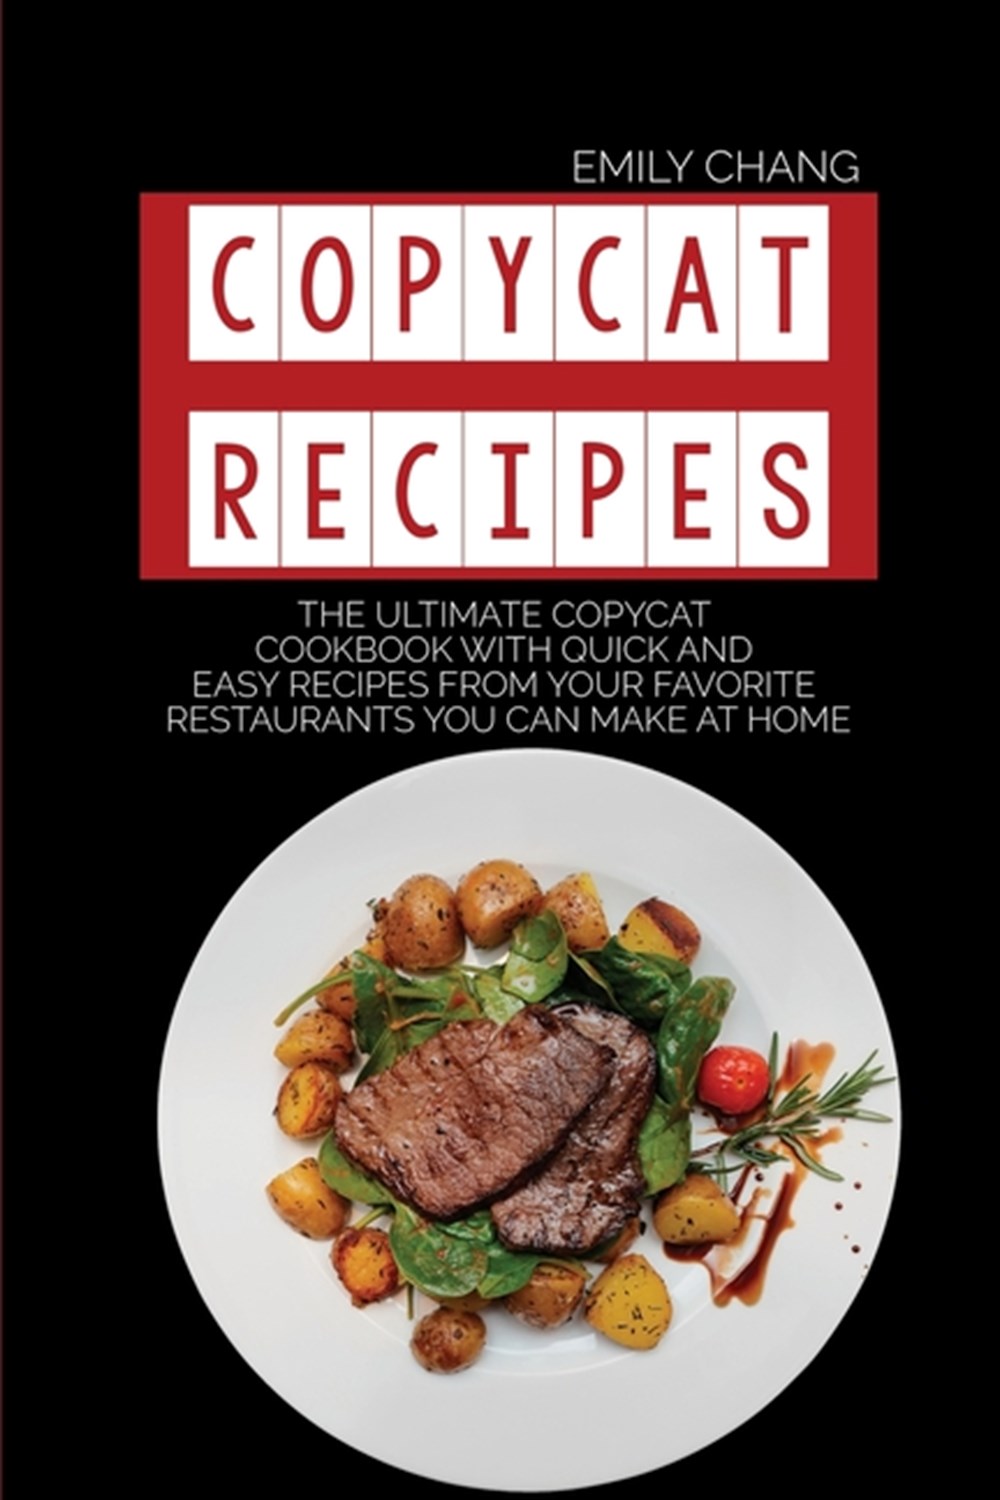 Copycat Recipes: The Ultimate Copycat Cookbook with Quick and Easy Recipes from Your Favorite Restau